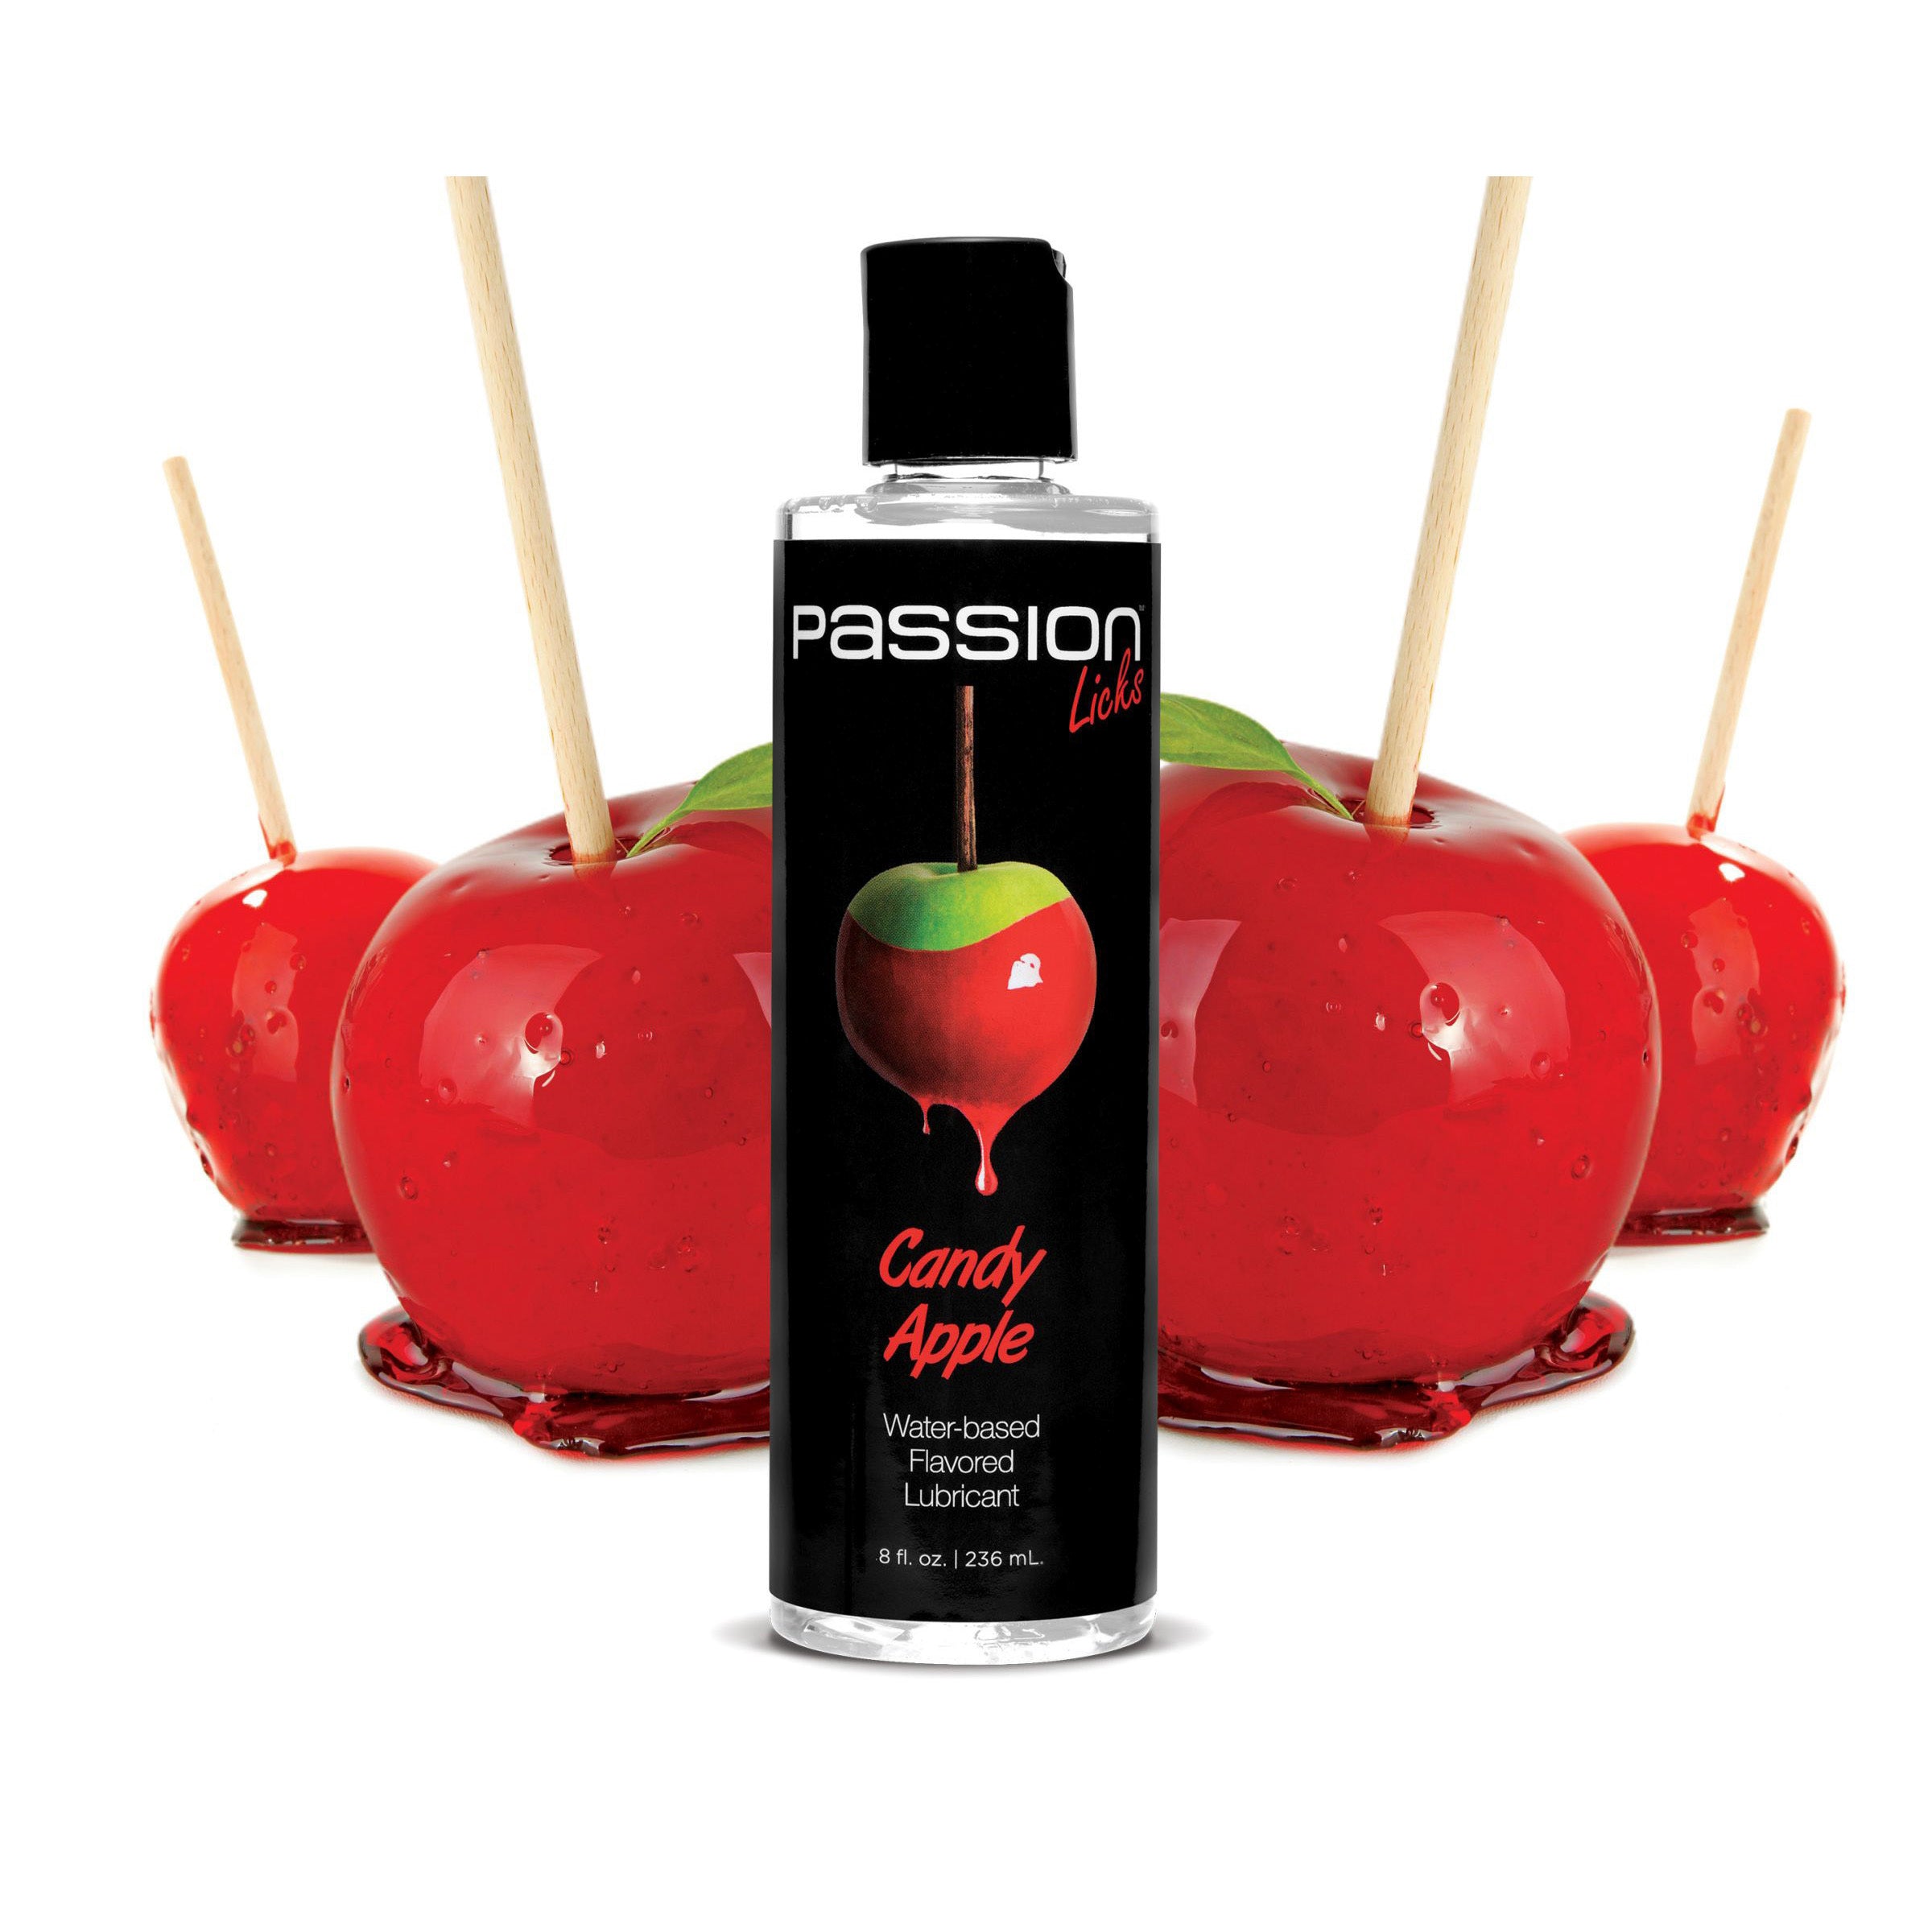 Passion Licks Candy Apple Water Based Flavored Lubricant - 8oz